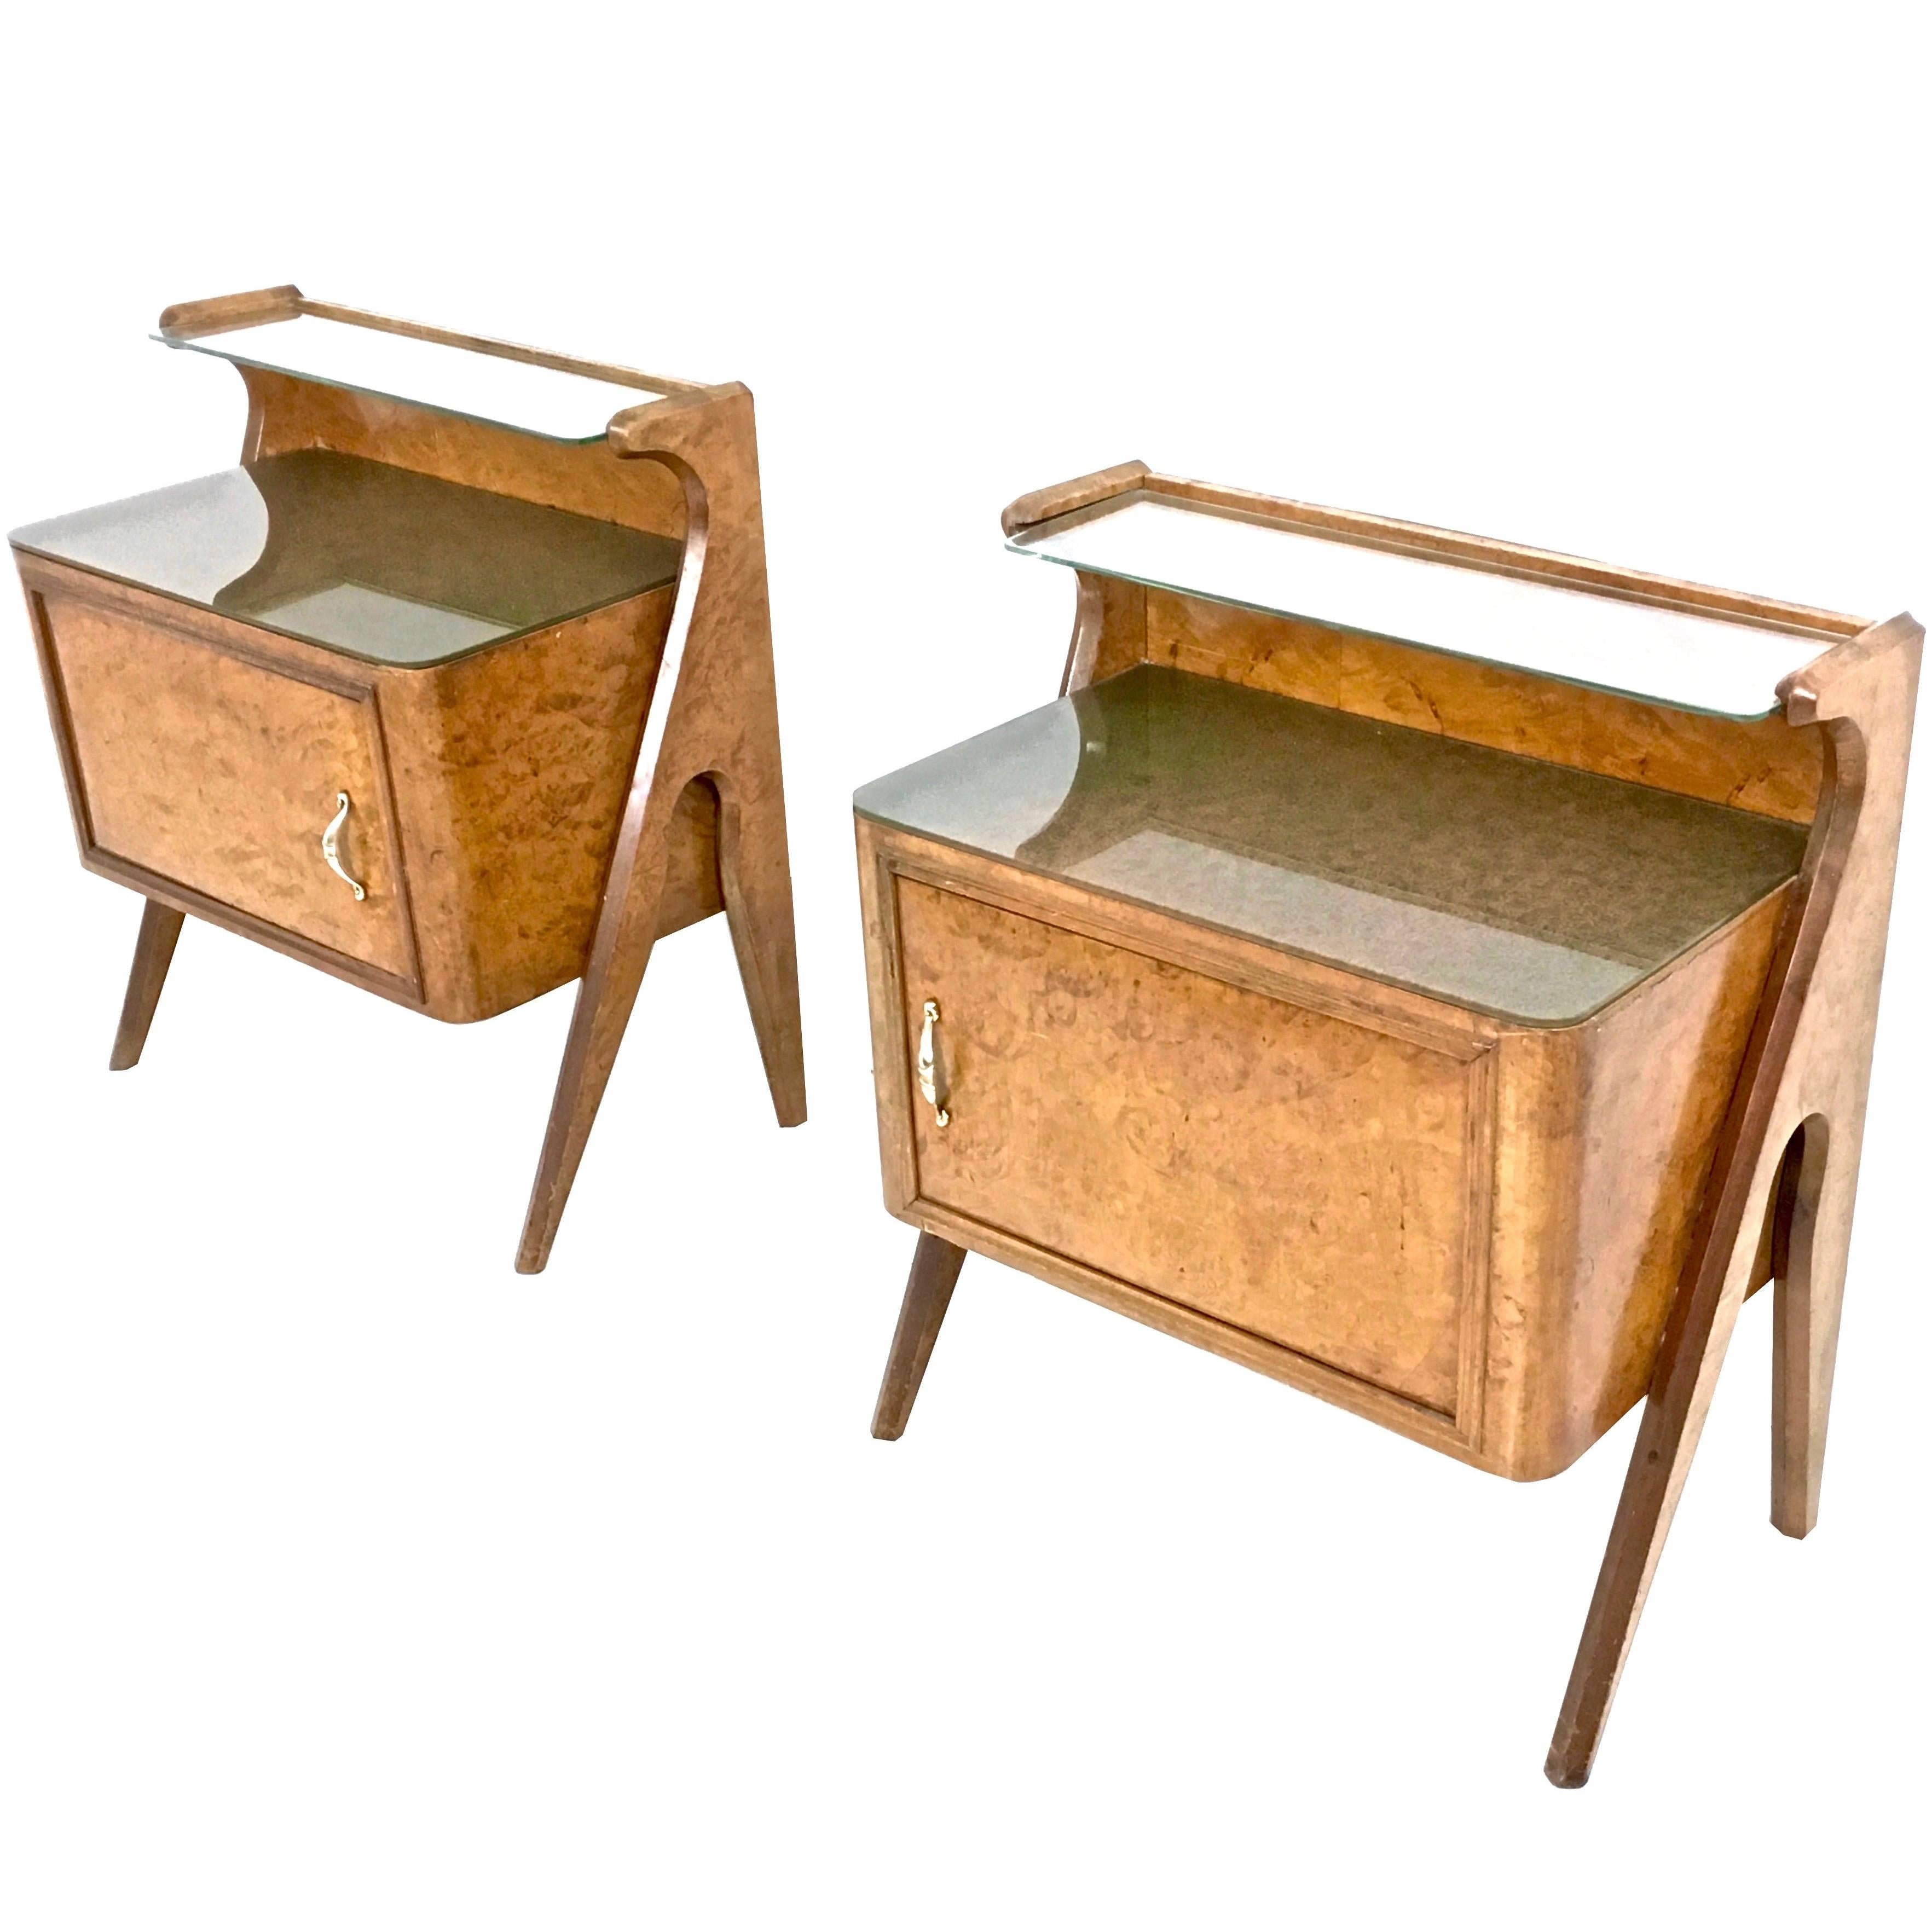 Pair of Birch Briar Root Nightstands with Glass Top, Italy, 1950s